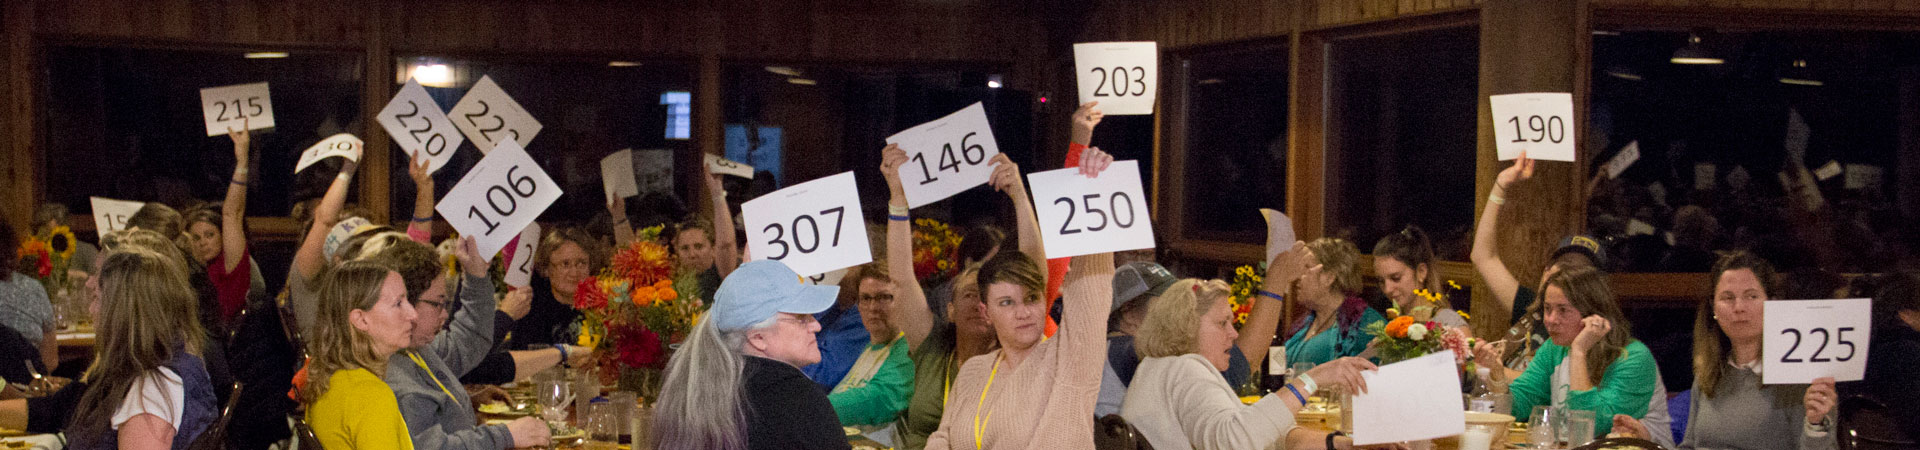  A group gathers in a camp lodge and sites at tables to participate in an auction where they raise a white piece of paper with a black number to bid. 